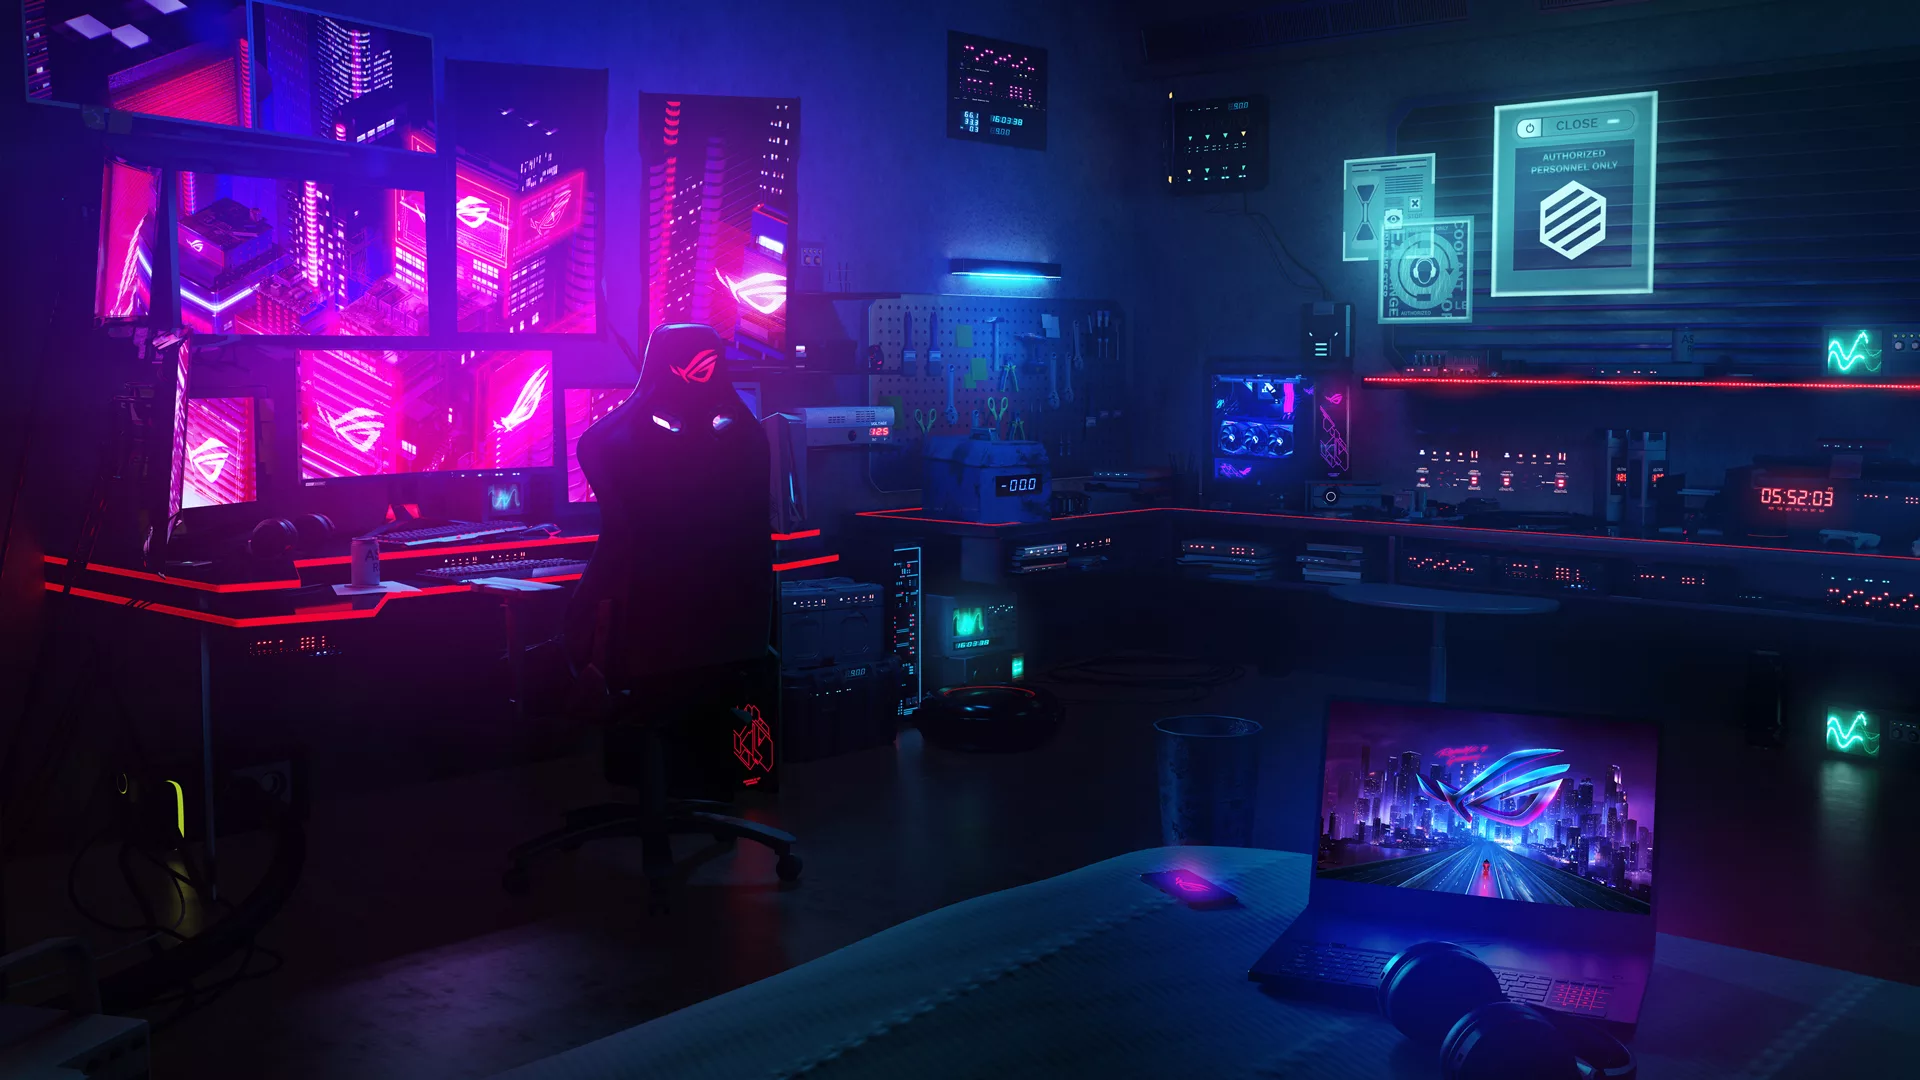 A cyberpunk-inspired room with multiple screens, gaming equipment, and neon lights. - Technology, gaming